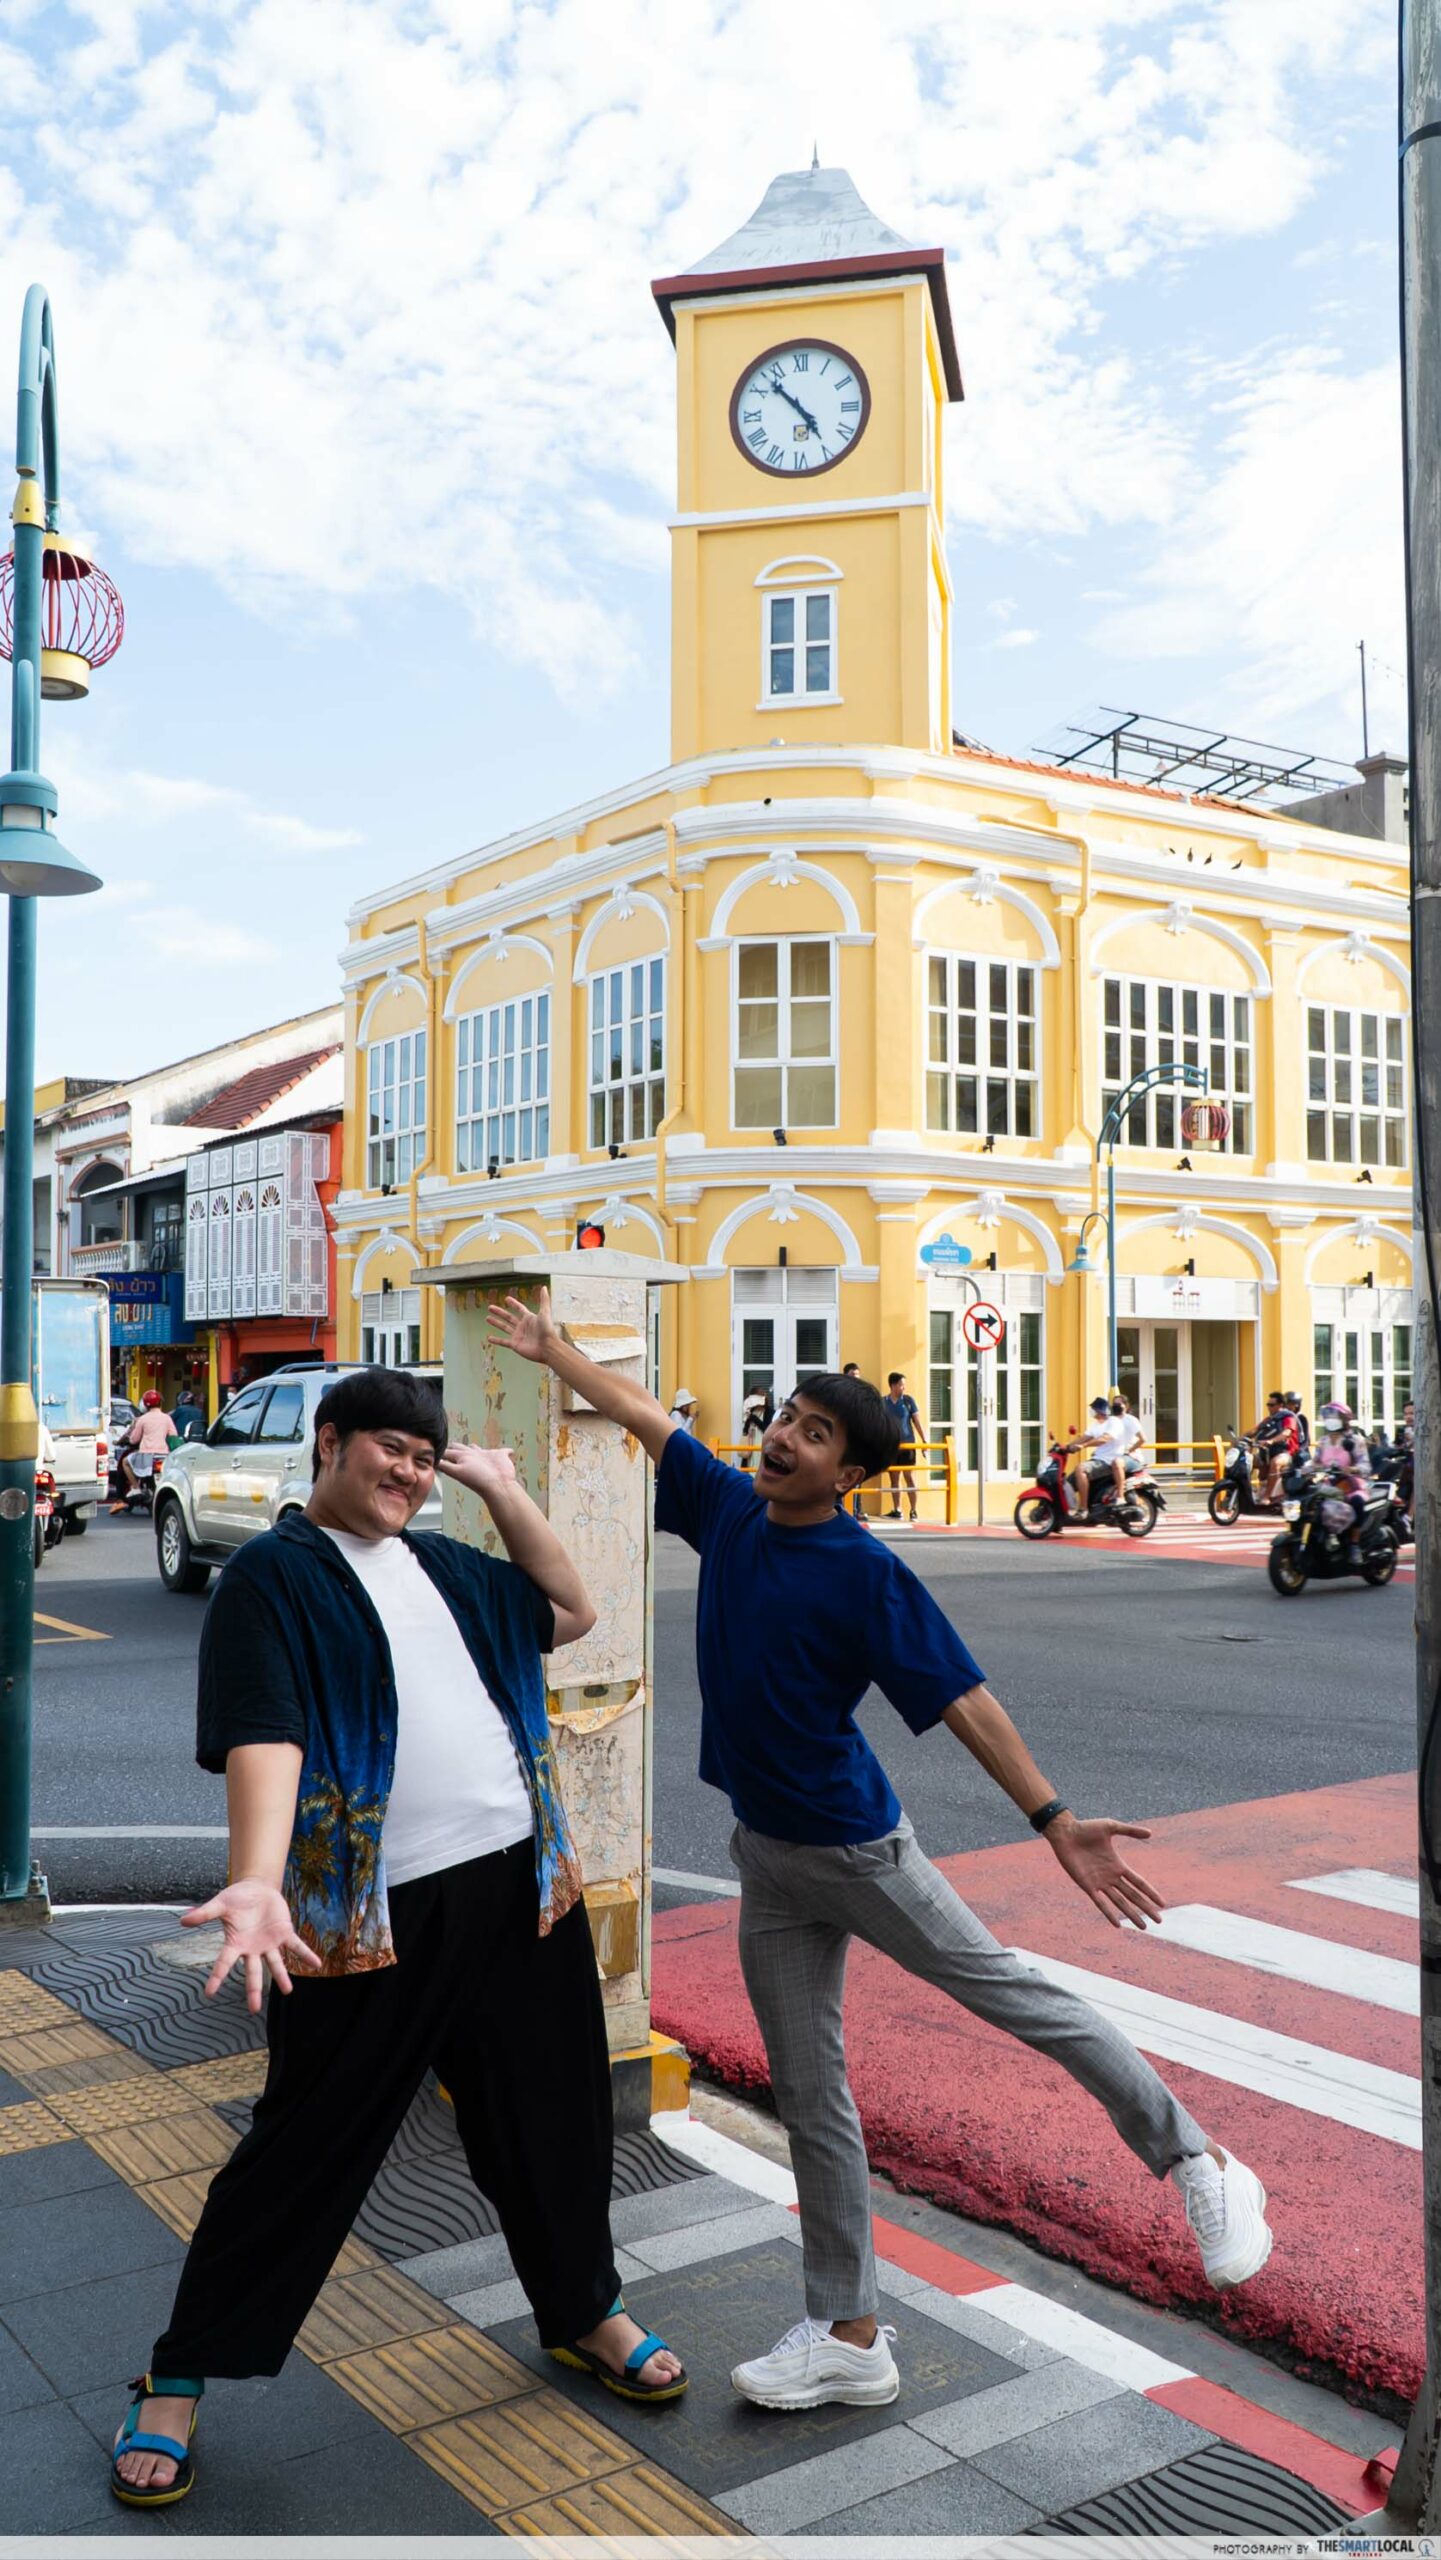 The TSL Thailand team posing with the Promthep Clock Tower, a landmark of Old Town Phuket in Southern Thailand.